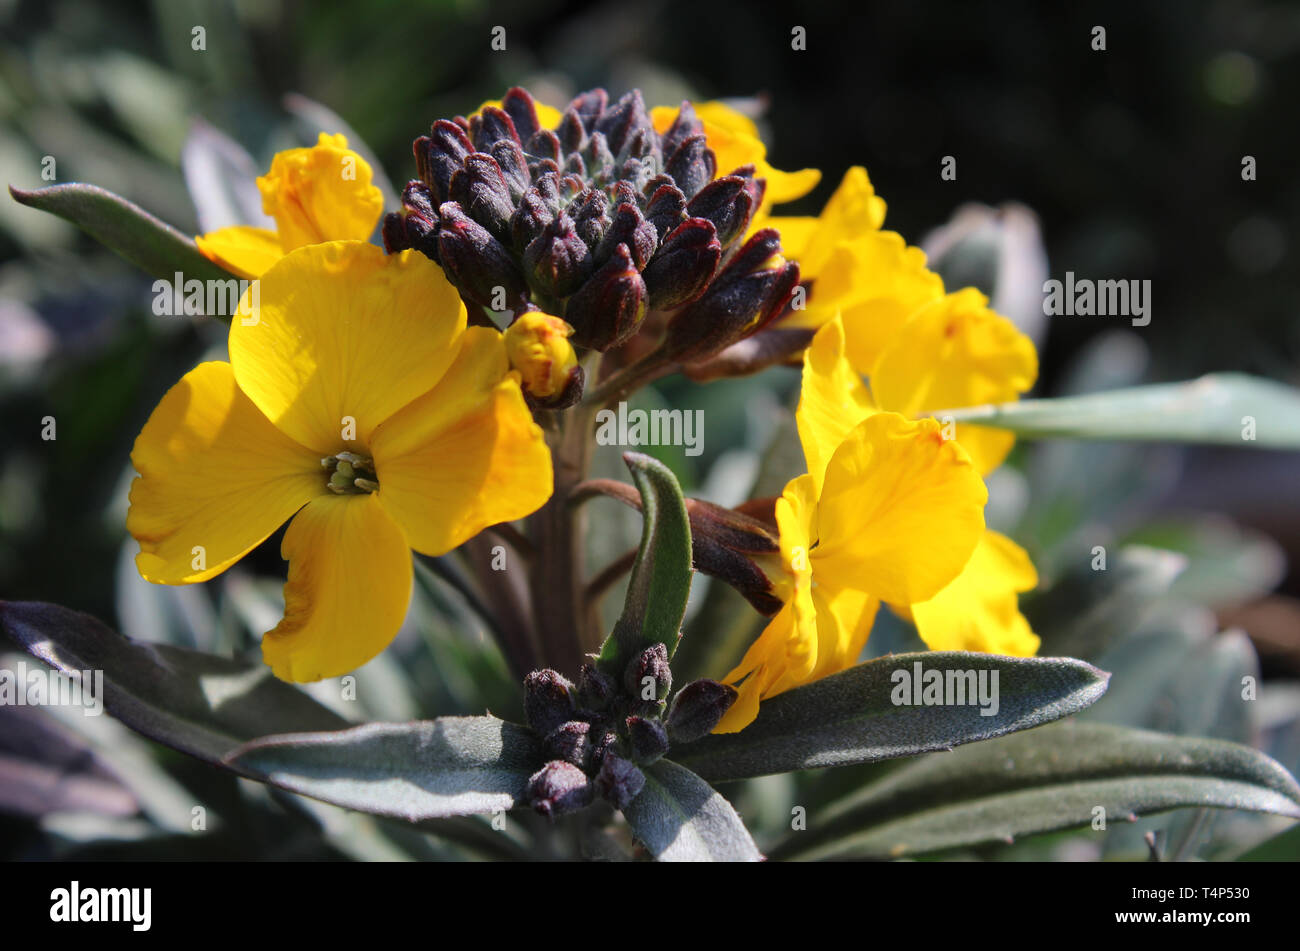 The bright yellow flowers and contrasting dark foliage of Erysimum linifolium Fragrant Sunshine. Also known as the Wallflower. Stock Photo